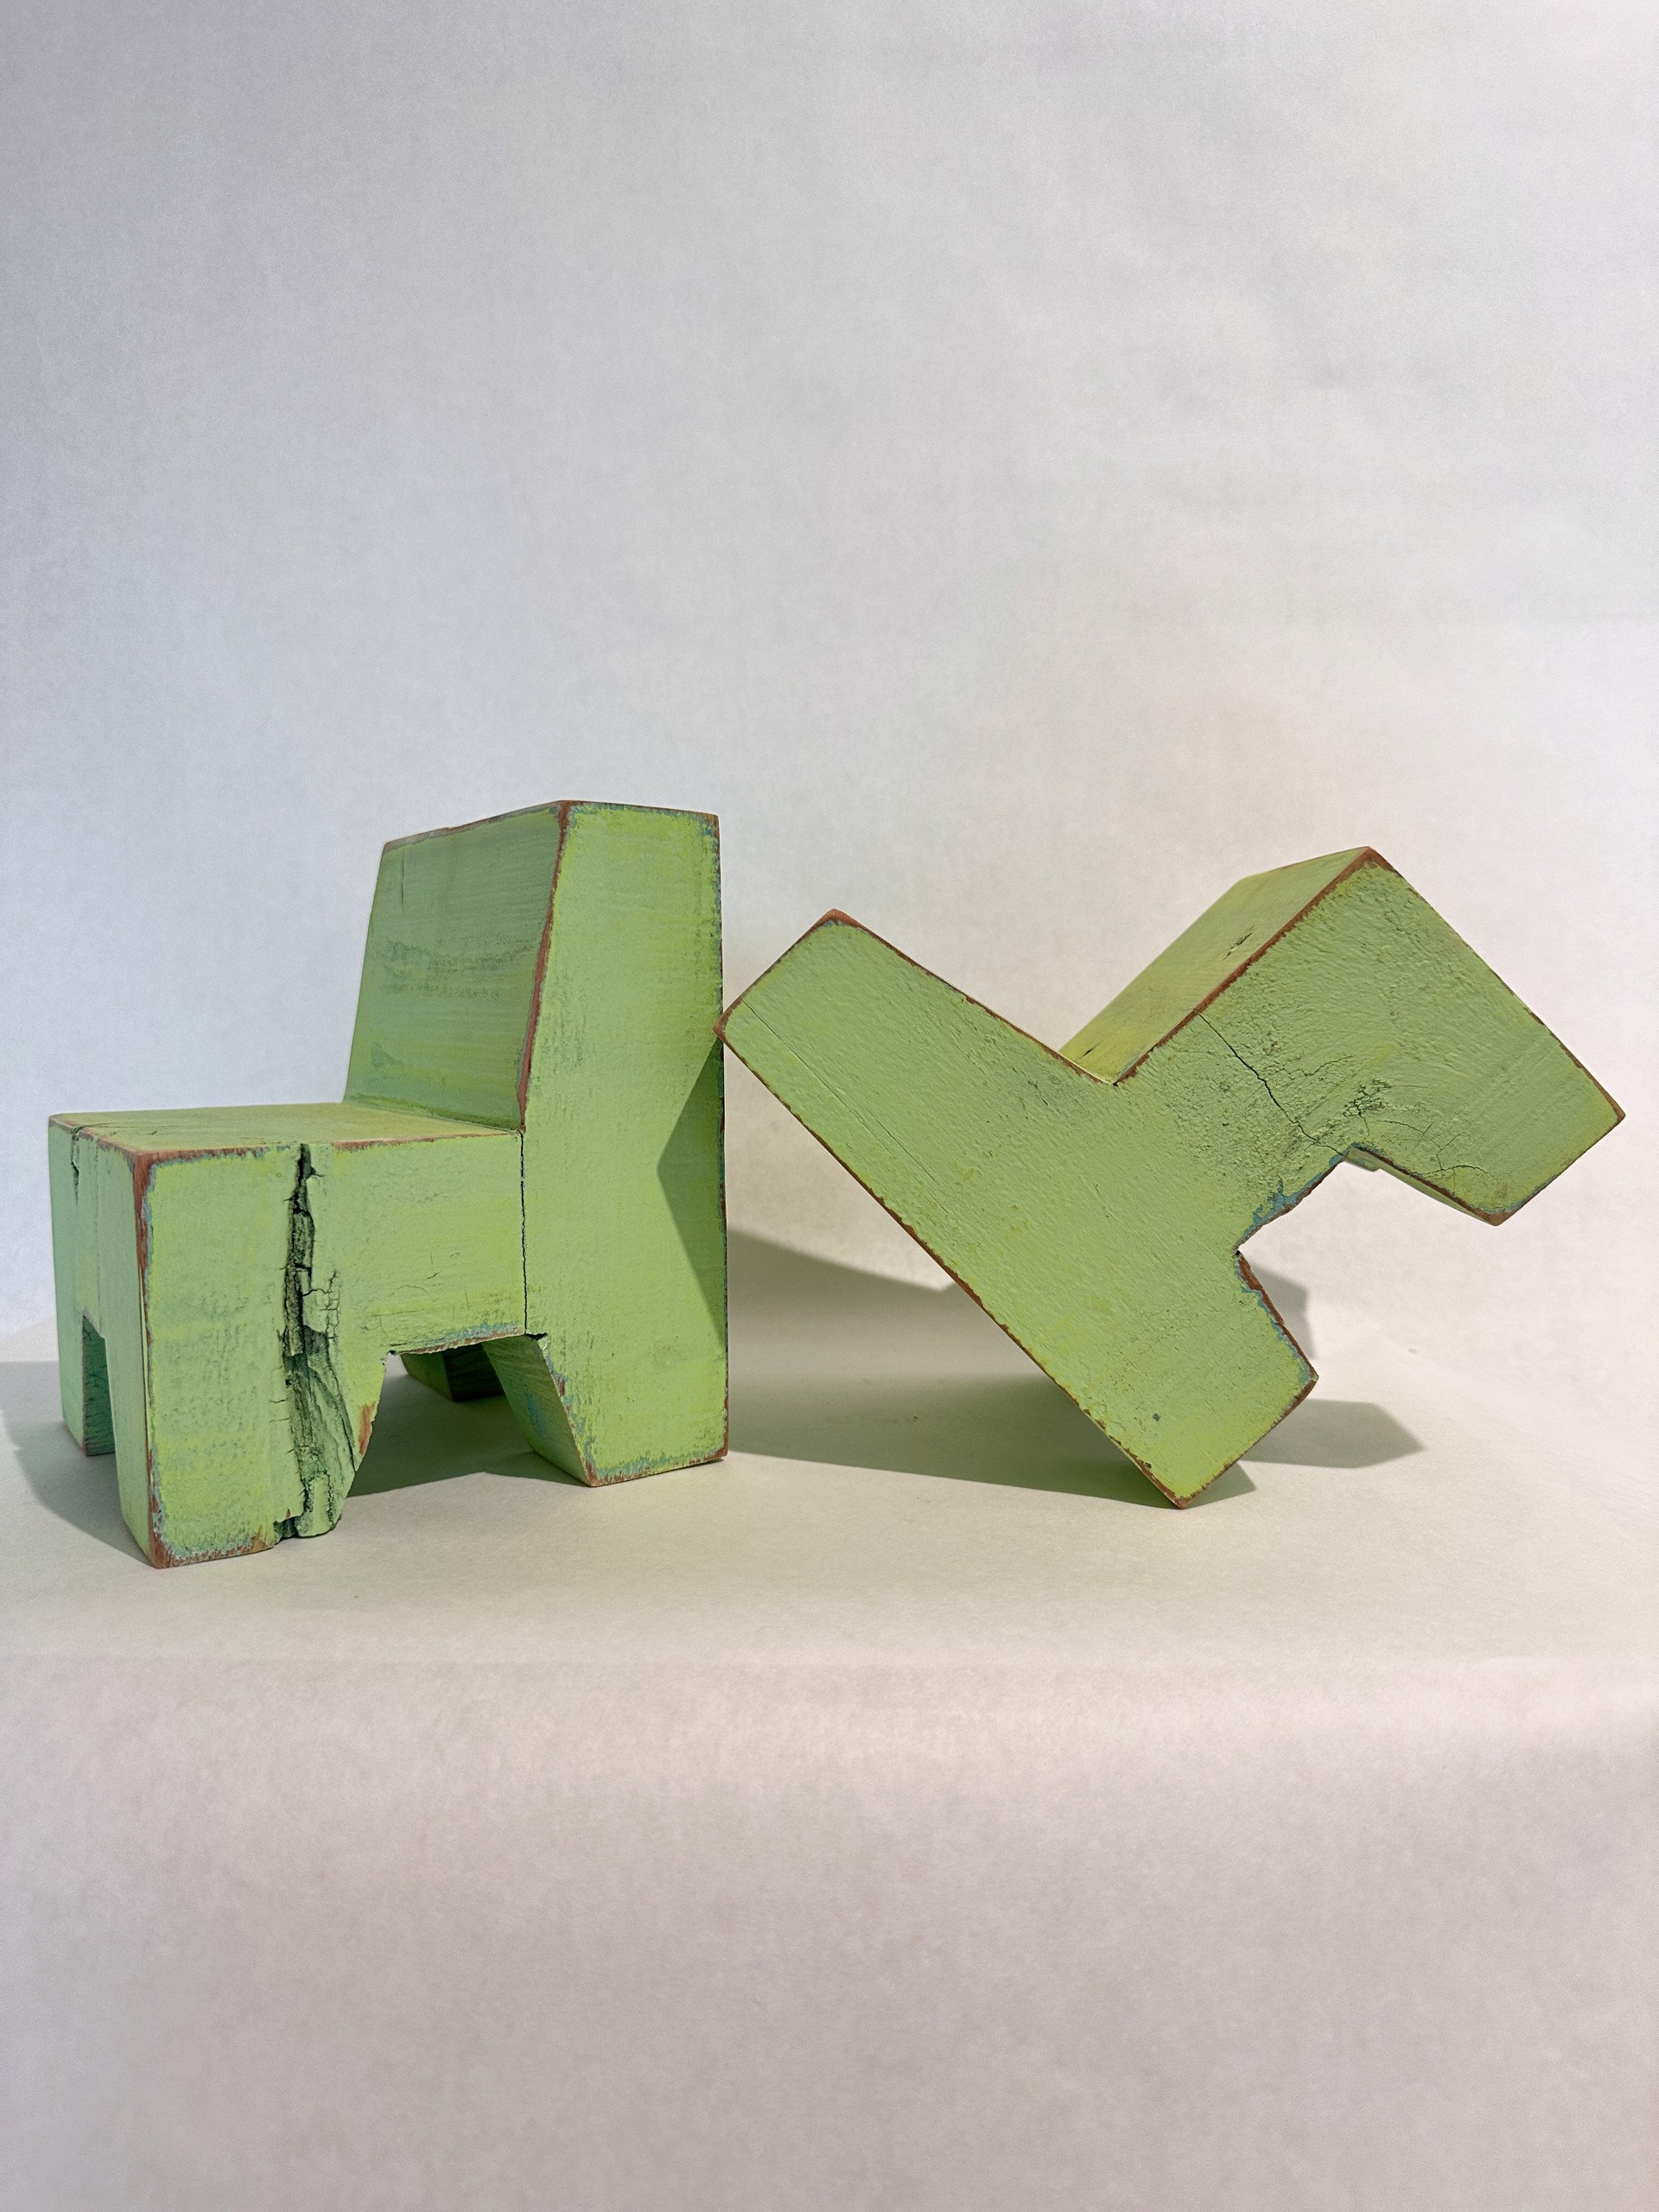 Chair Pair bookends by Ellie Richards